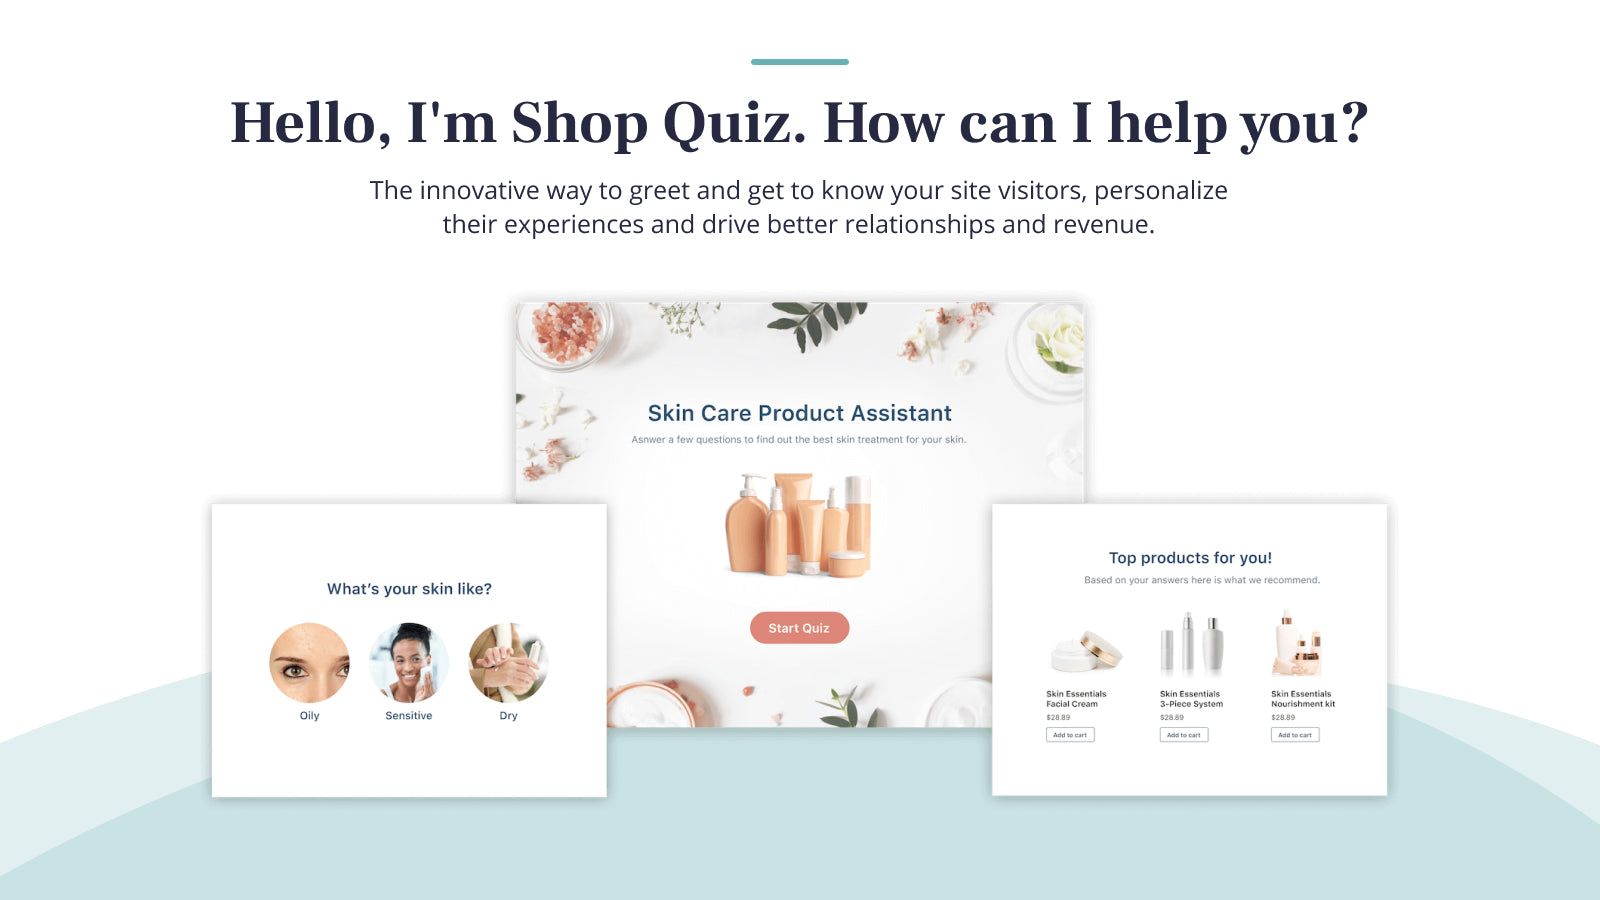 Use Shop Quiz to recommend the right products and collect data